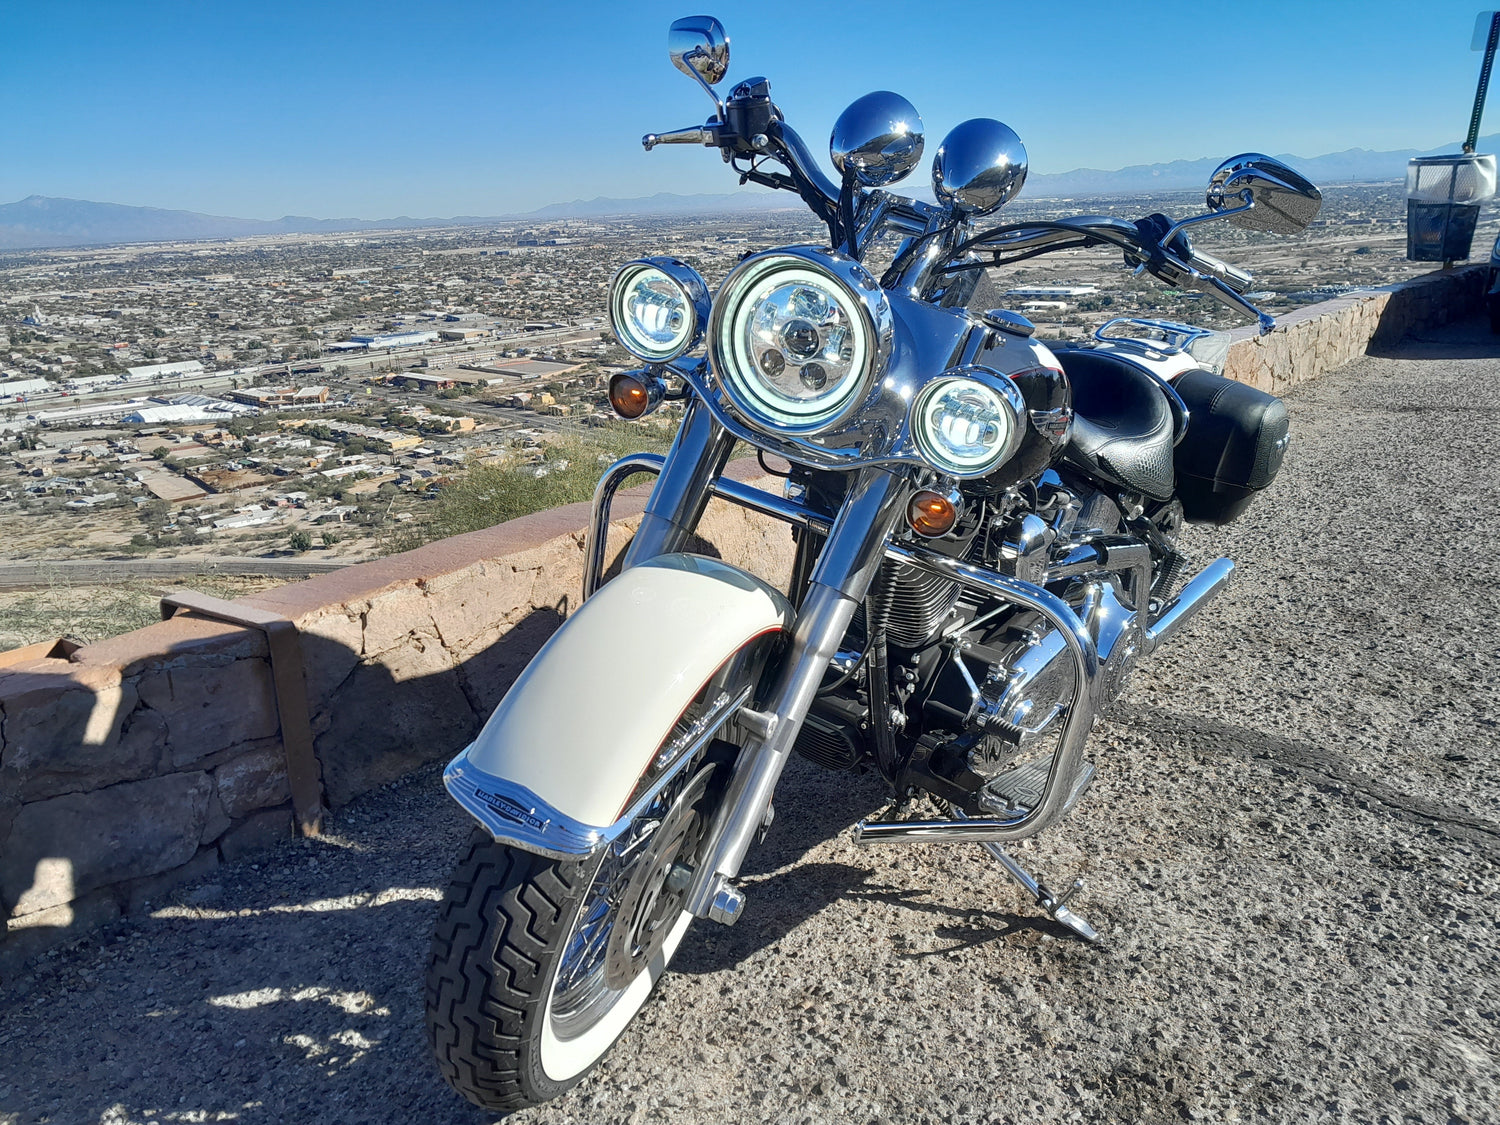 Riding Safe: Motorcycle Safety Tips for Every Rider